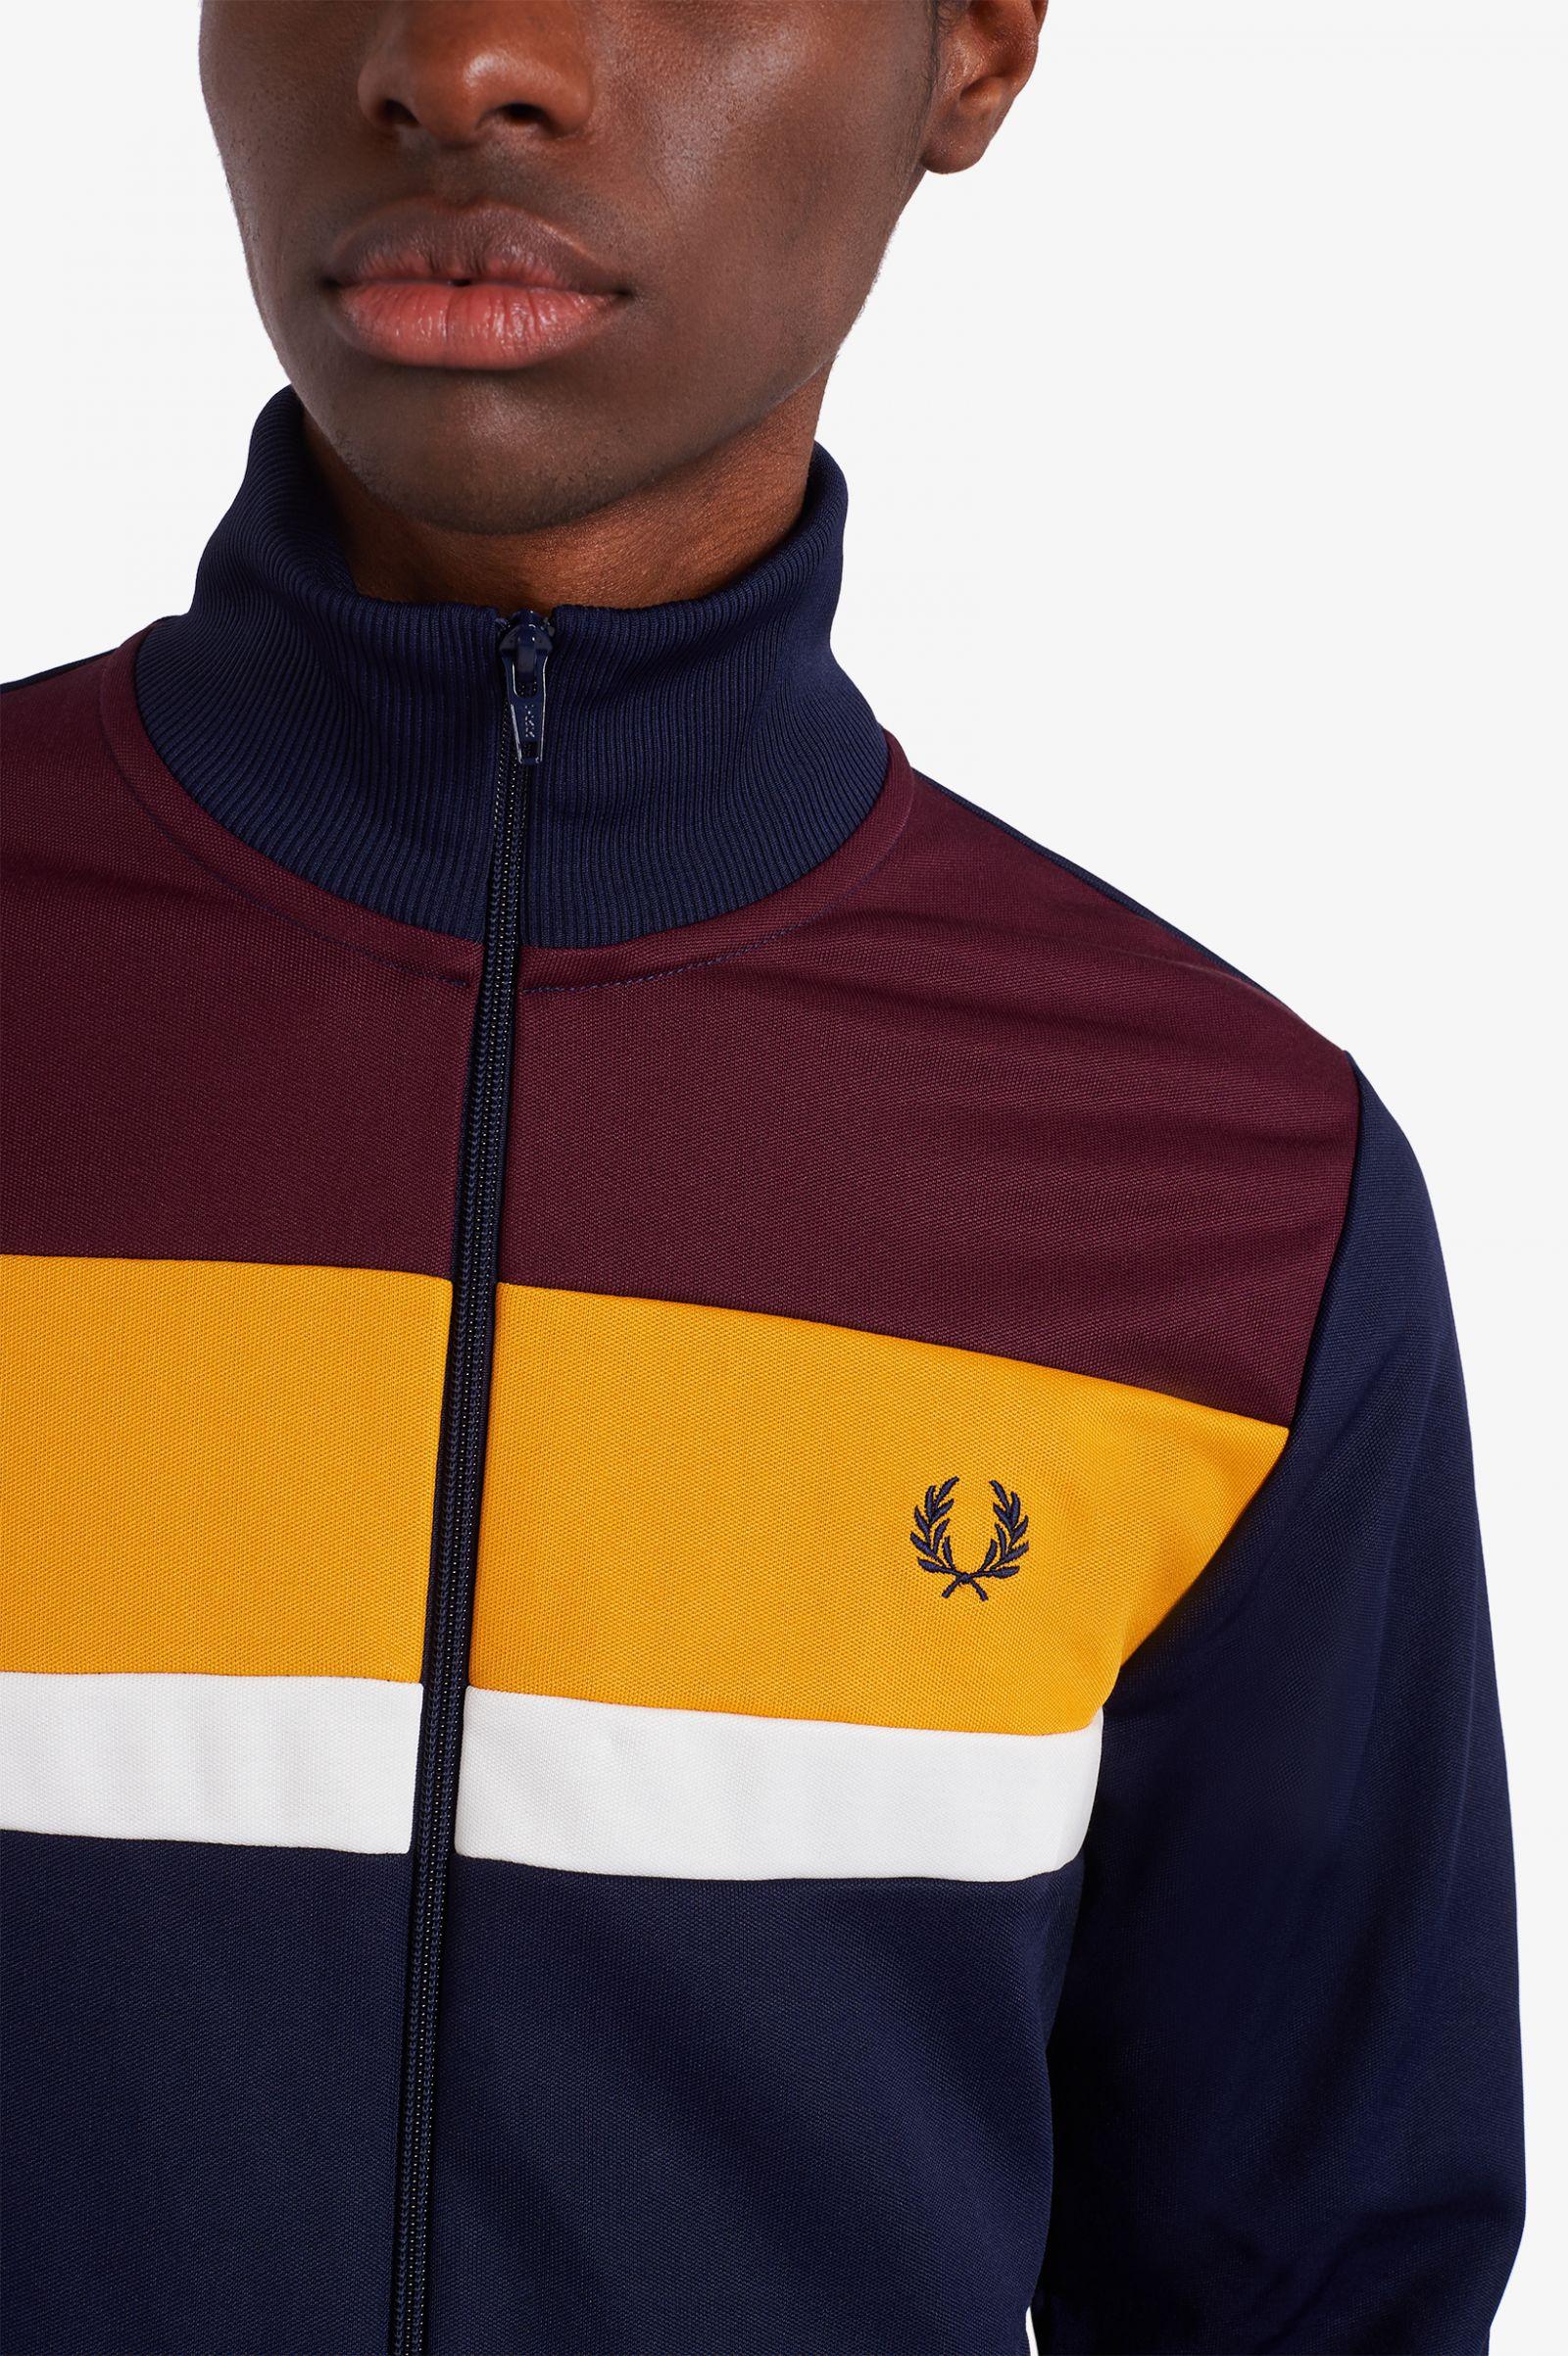 Fred Perry Carbon Blue Color Block J9543 266 Track Jacket for Men - Lyst